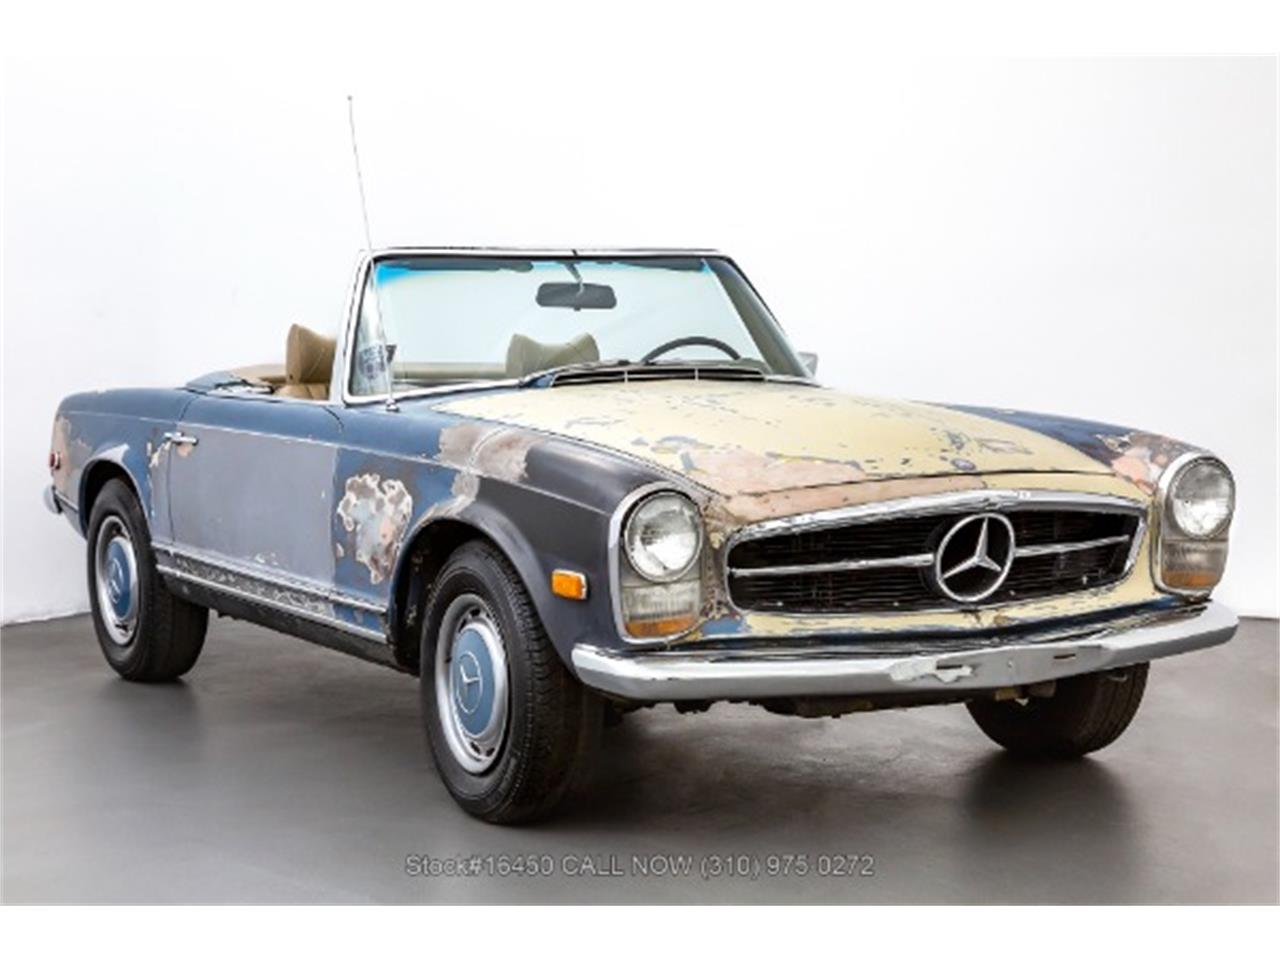 For Sale: 1969 Mercedes-Benz 280SL in Beverly Hills, California for sale in Beverly Hills, CA